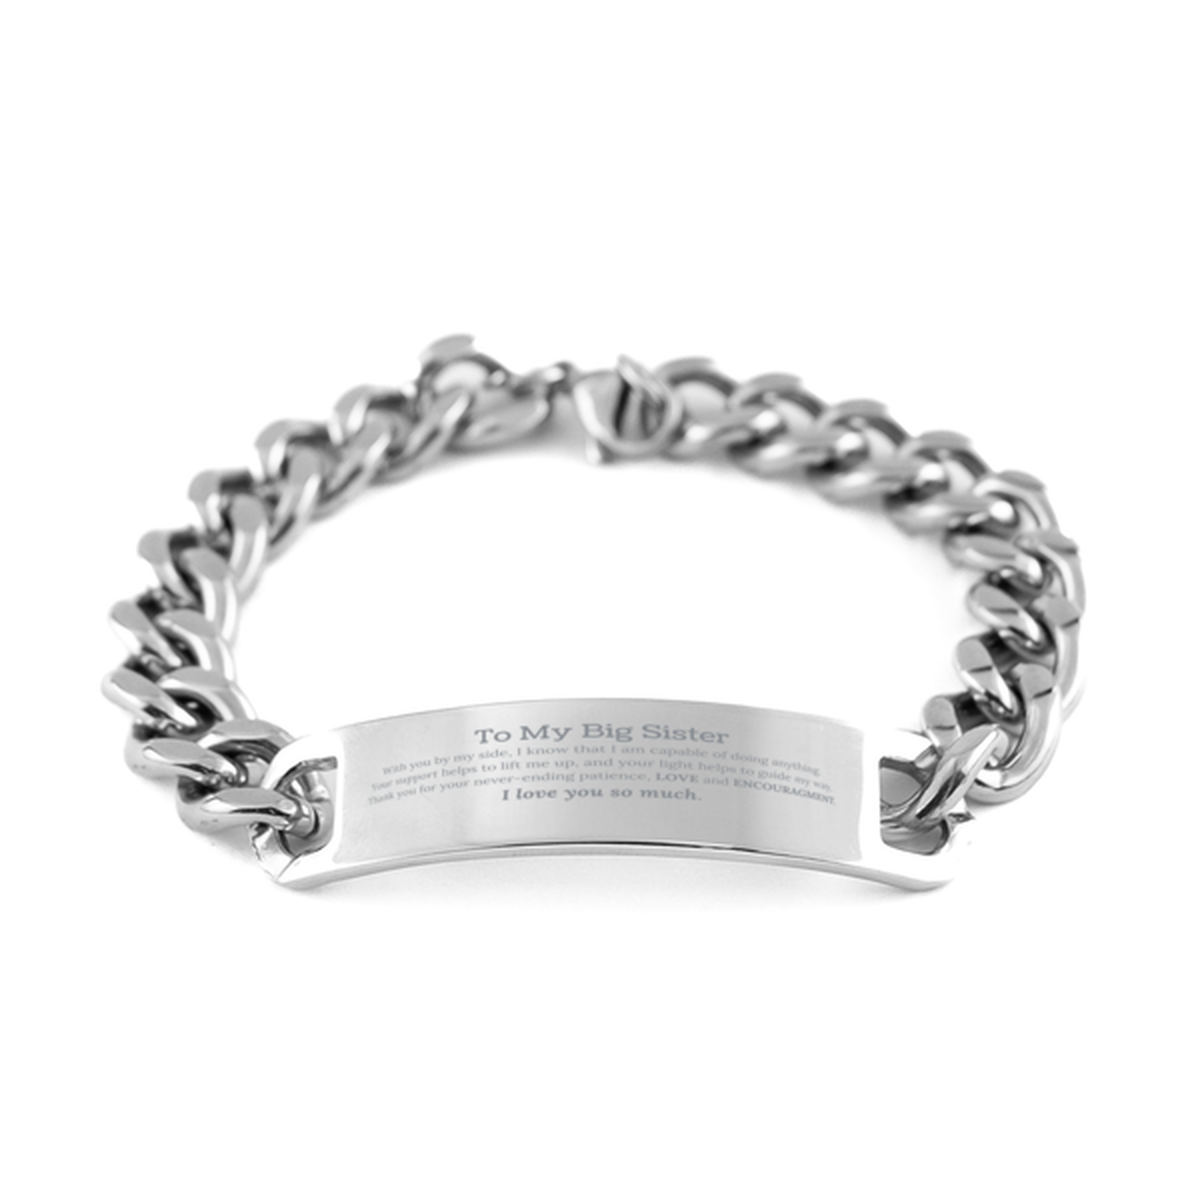 Appreciation Big Sister Cuban Chain Stainless Steel Bracelet Gifts, To My Big Sister Birthday Christmas Wedding Keepsake Gifts for Big Sister With you by my side, I know that I am capable of doing anything. I love you so much